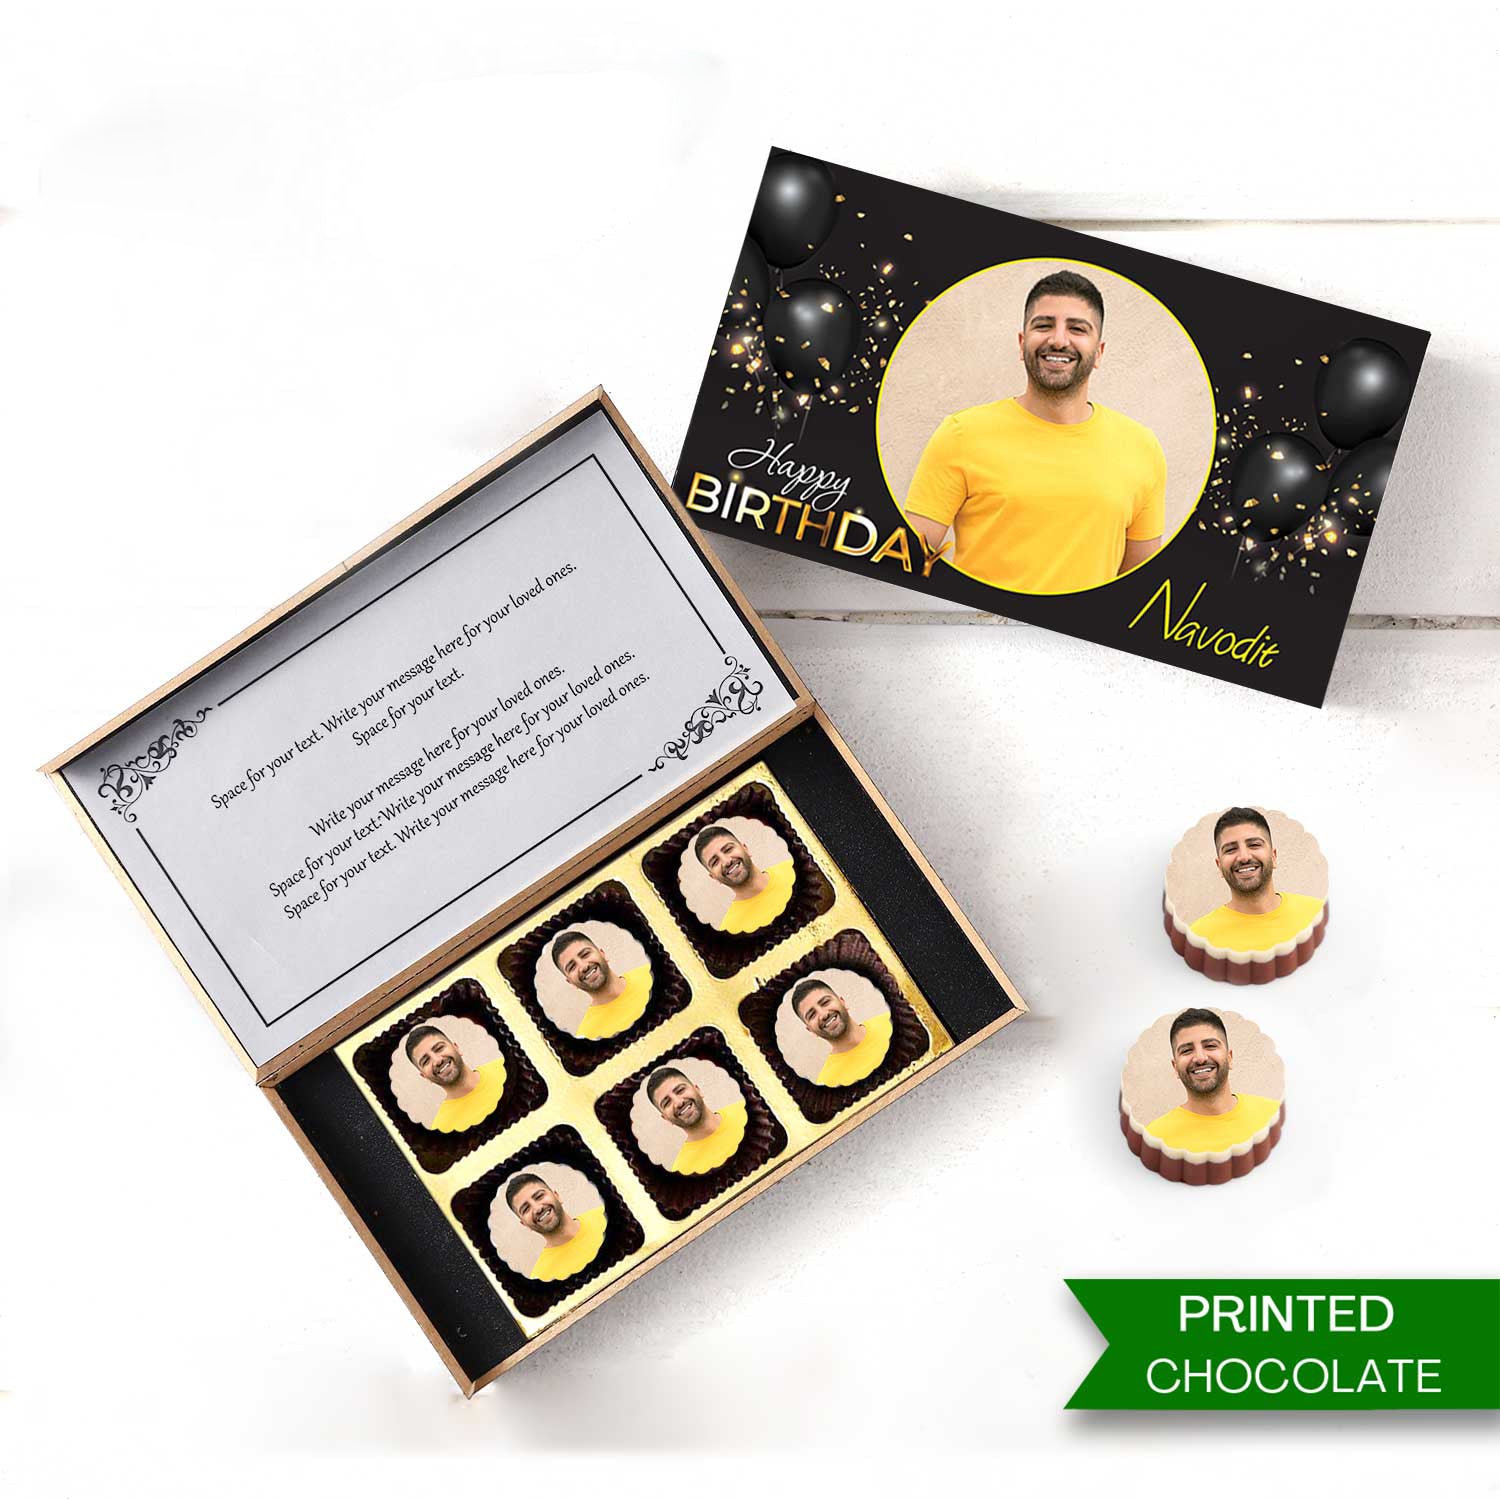 Personalized Chocolates with Printed Name